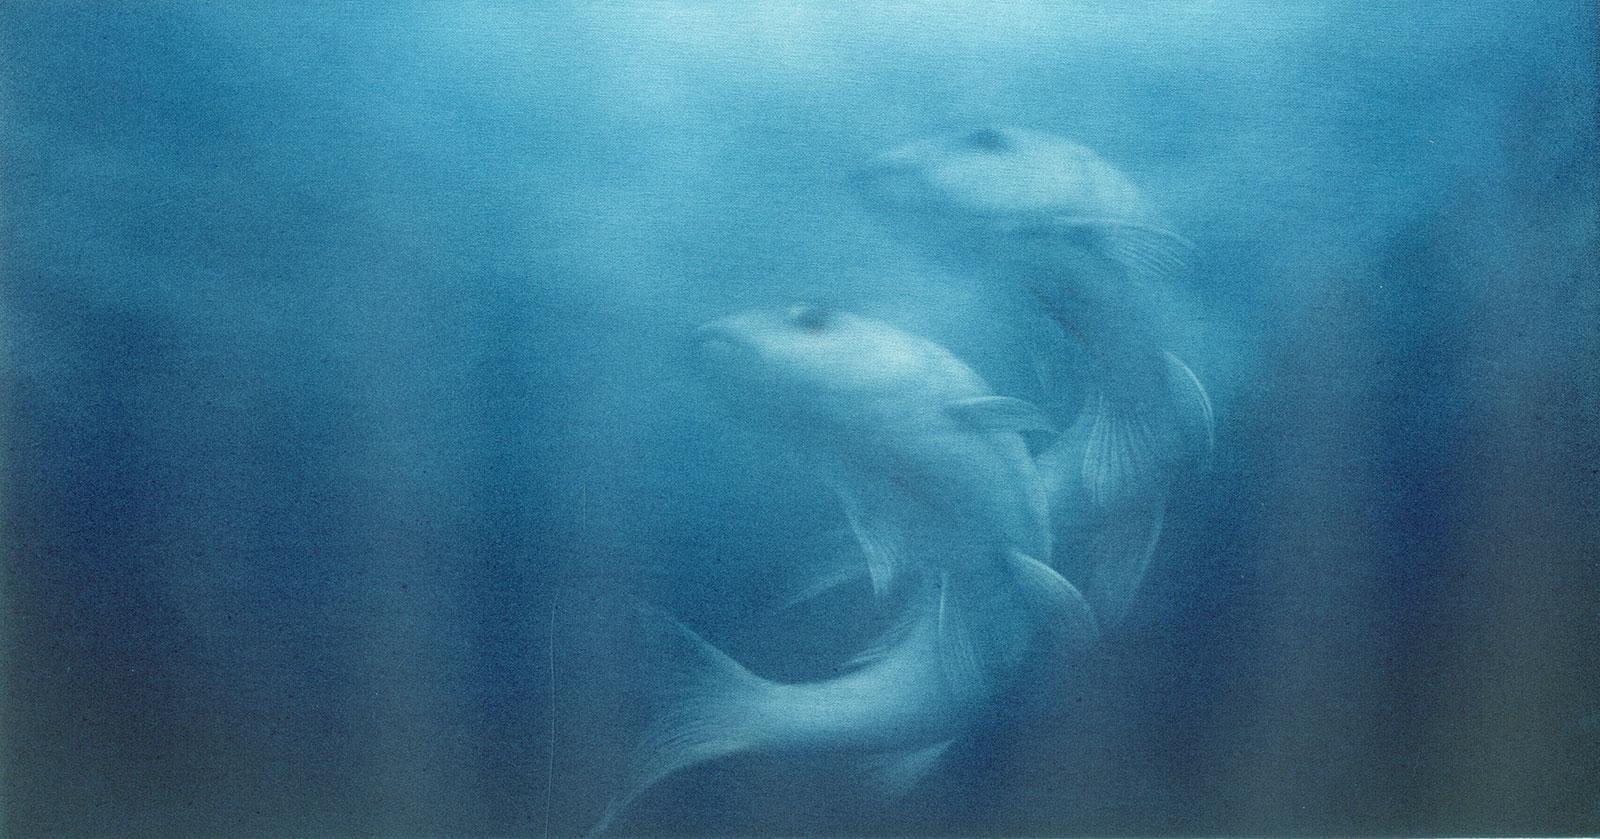 Mikio Watanabe Animal Print - Memoire d' Eau III (Memory of the Water conjures up two fish swimming in tandem)